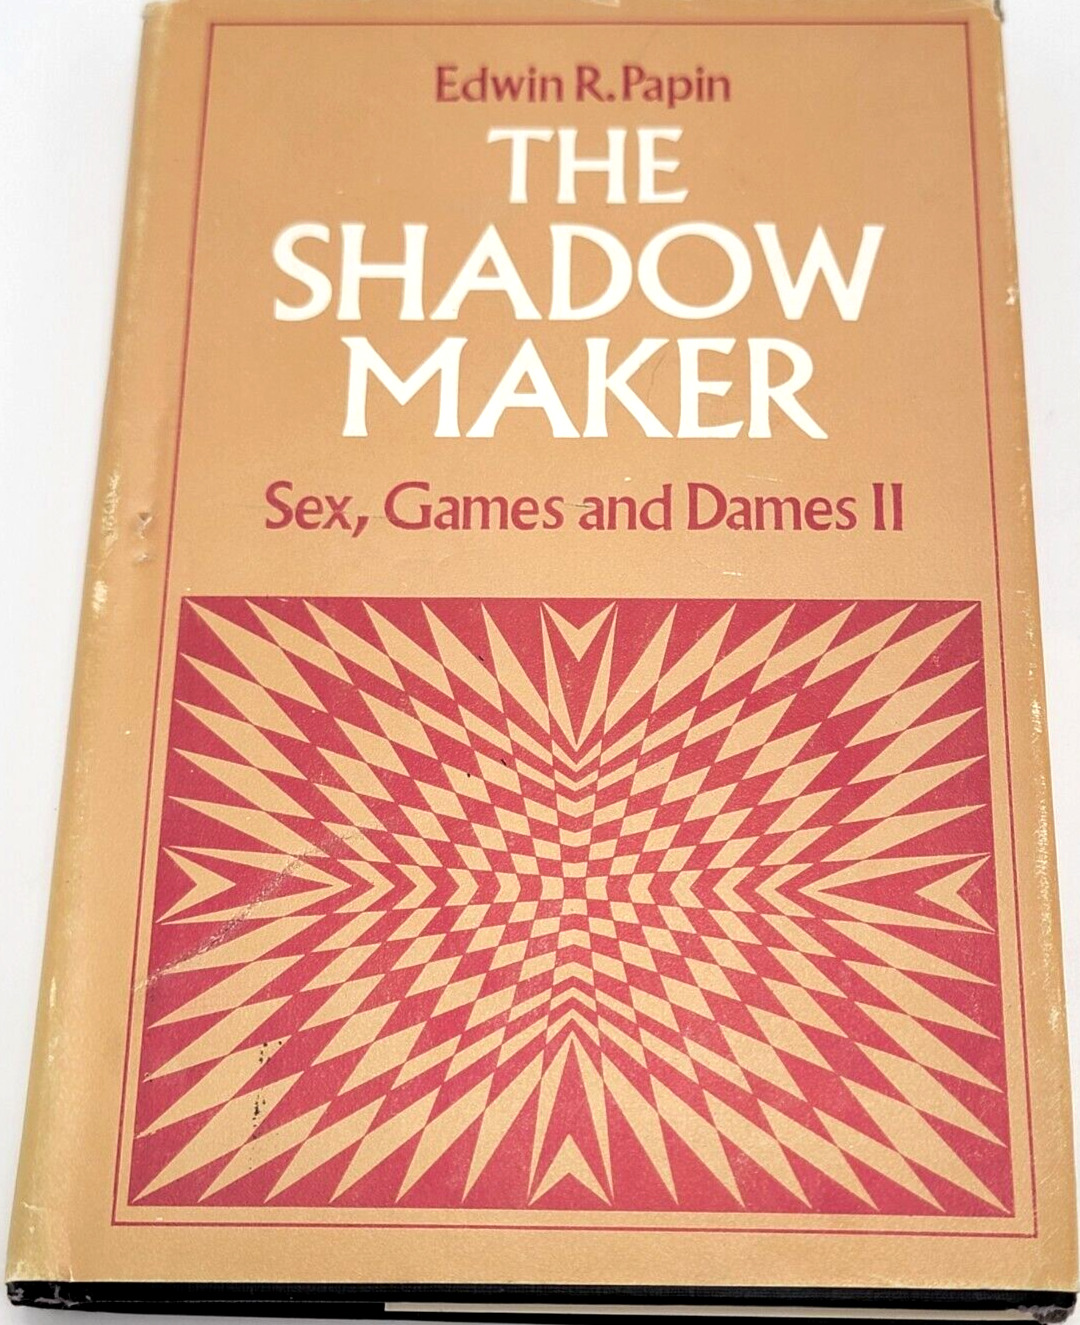 Very Rare The Shadow Maker by Edwin R. Papin Sex, Games and Dames II SIGNED HC